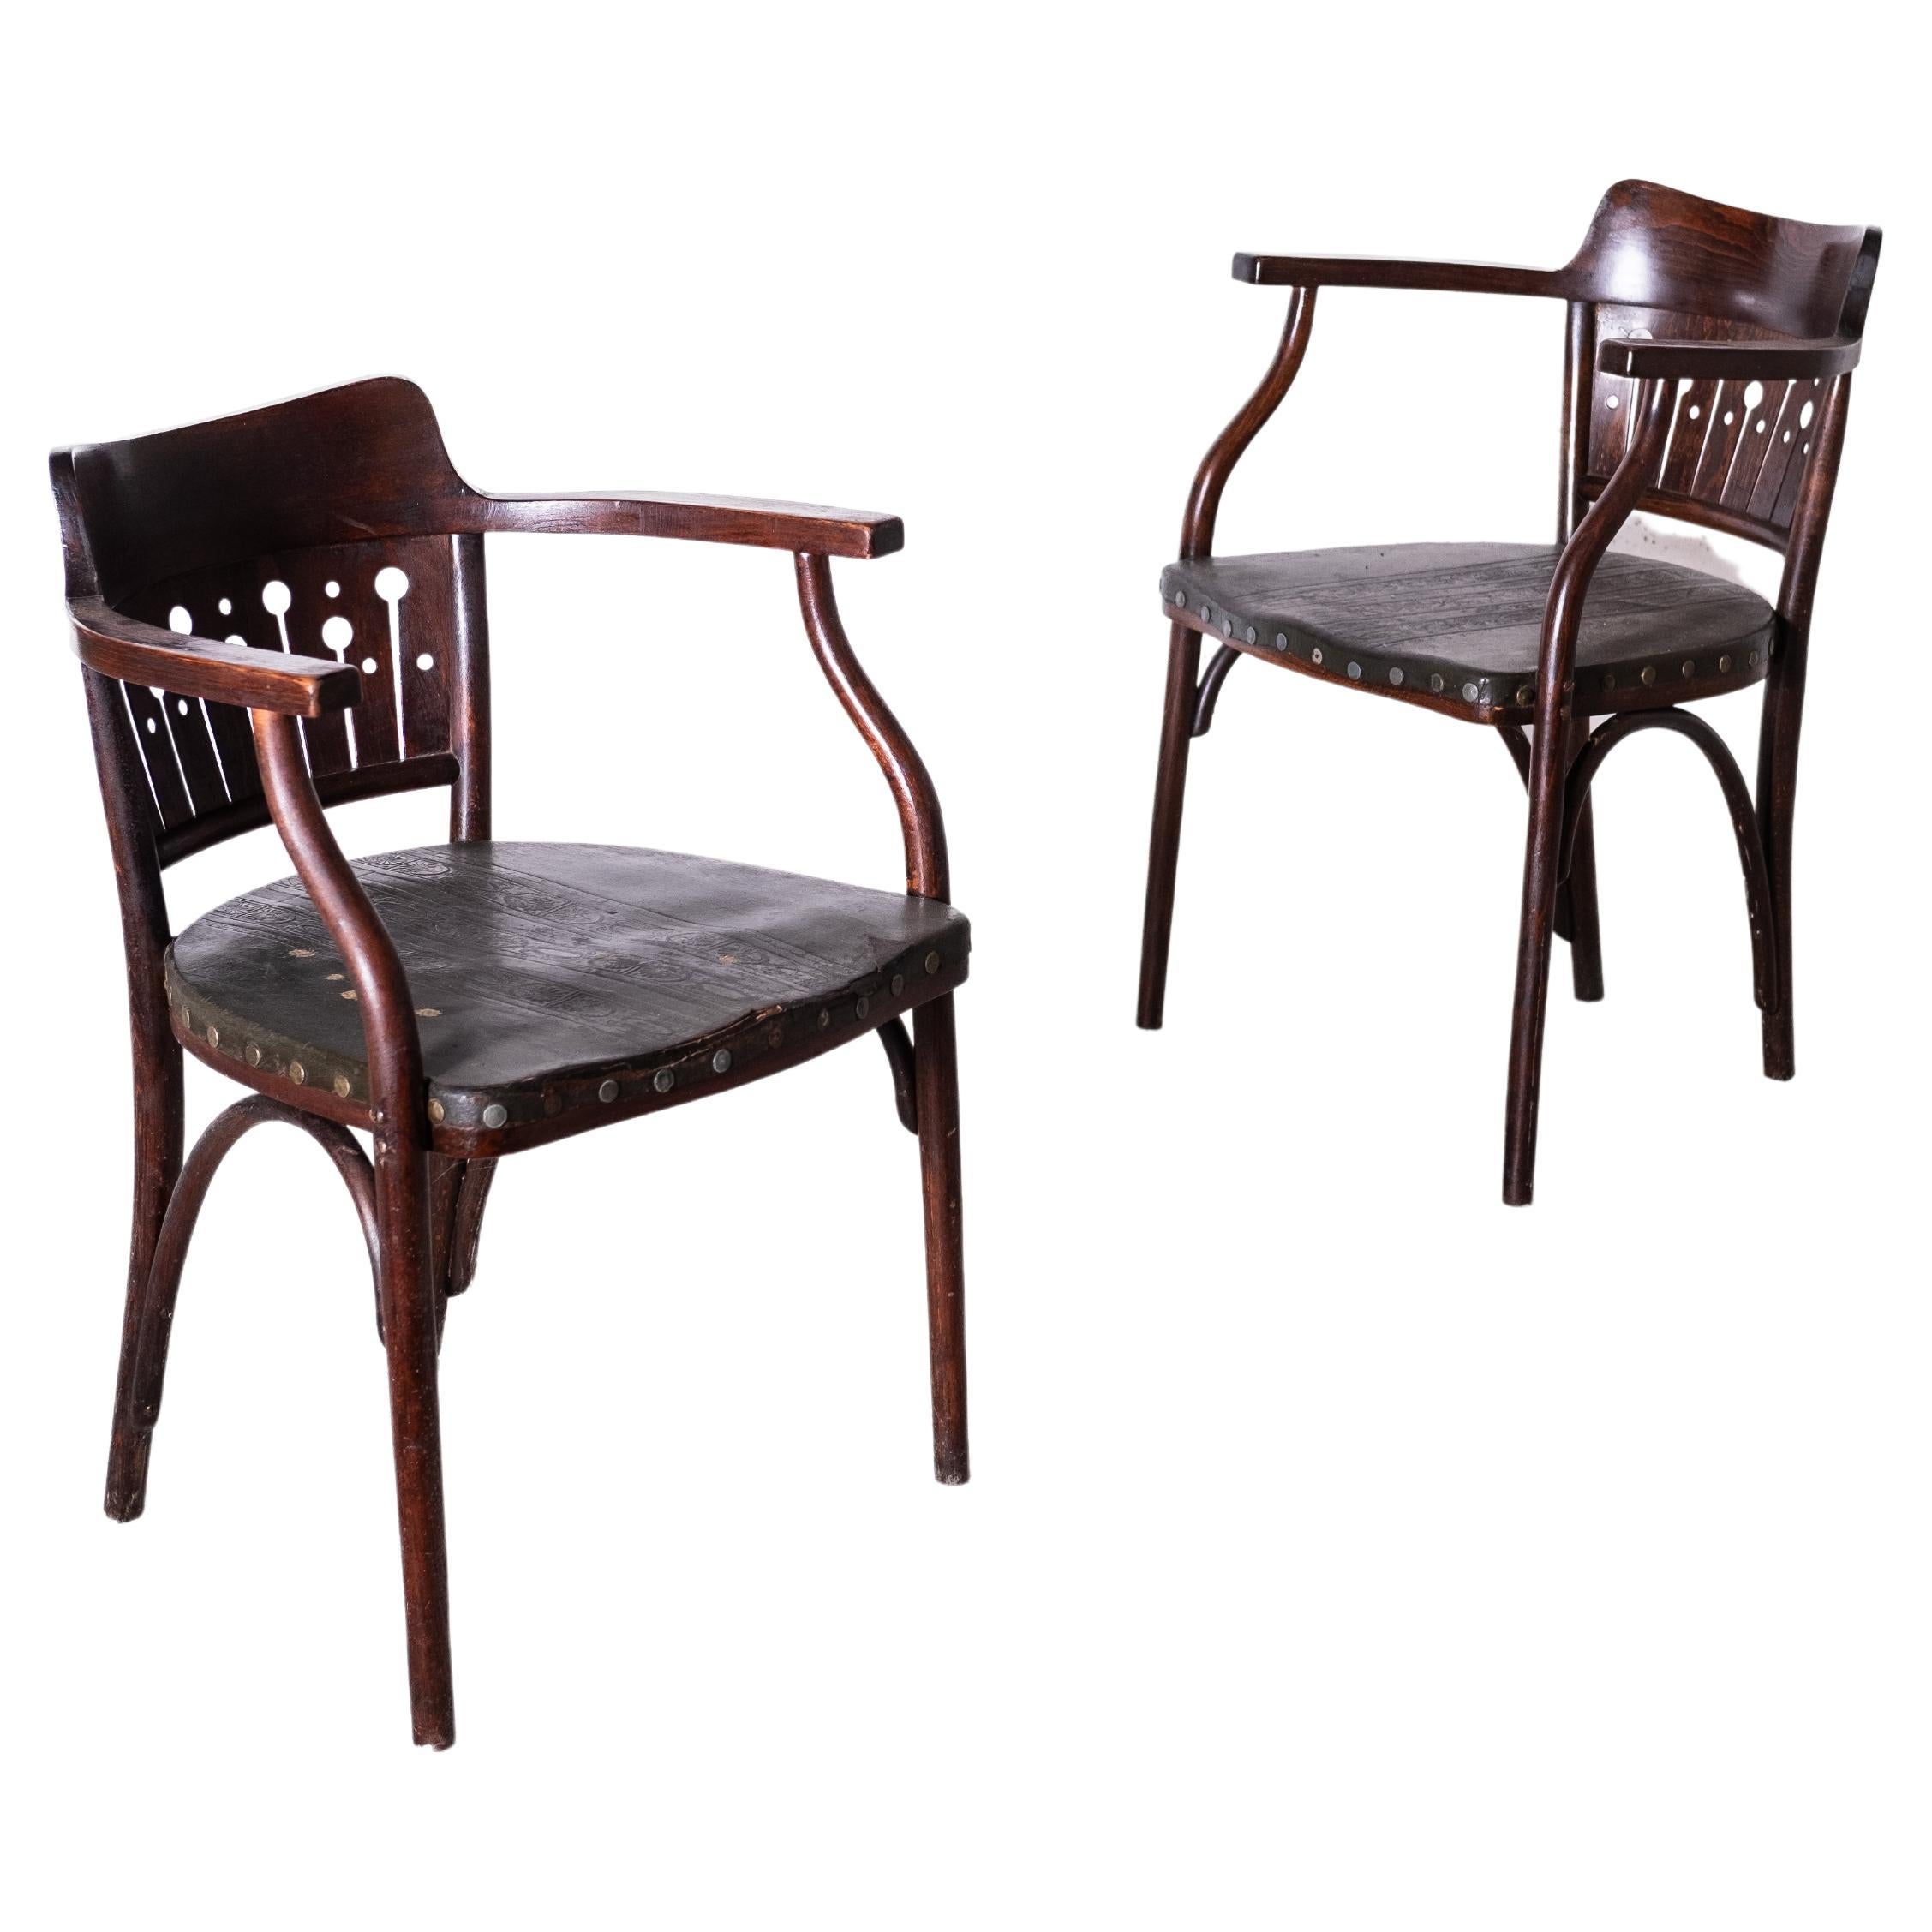 Art Nouveau Bentwood Armchairs by O. Wagner / G. Siegel, Thonet, Set of 2, 1905 For Sale